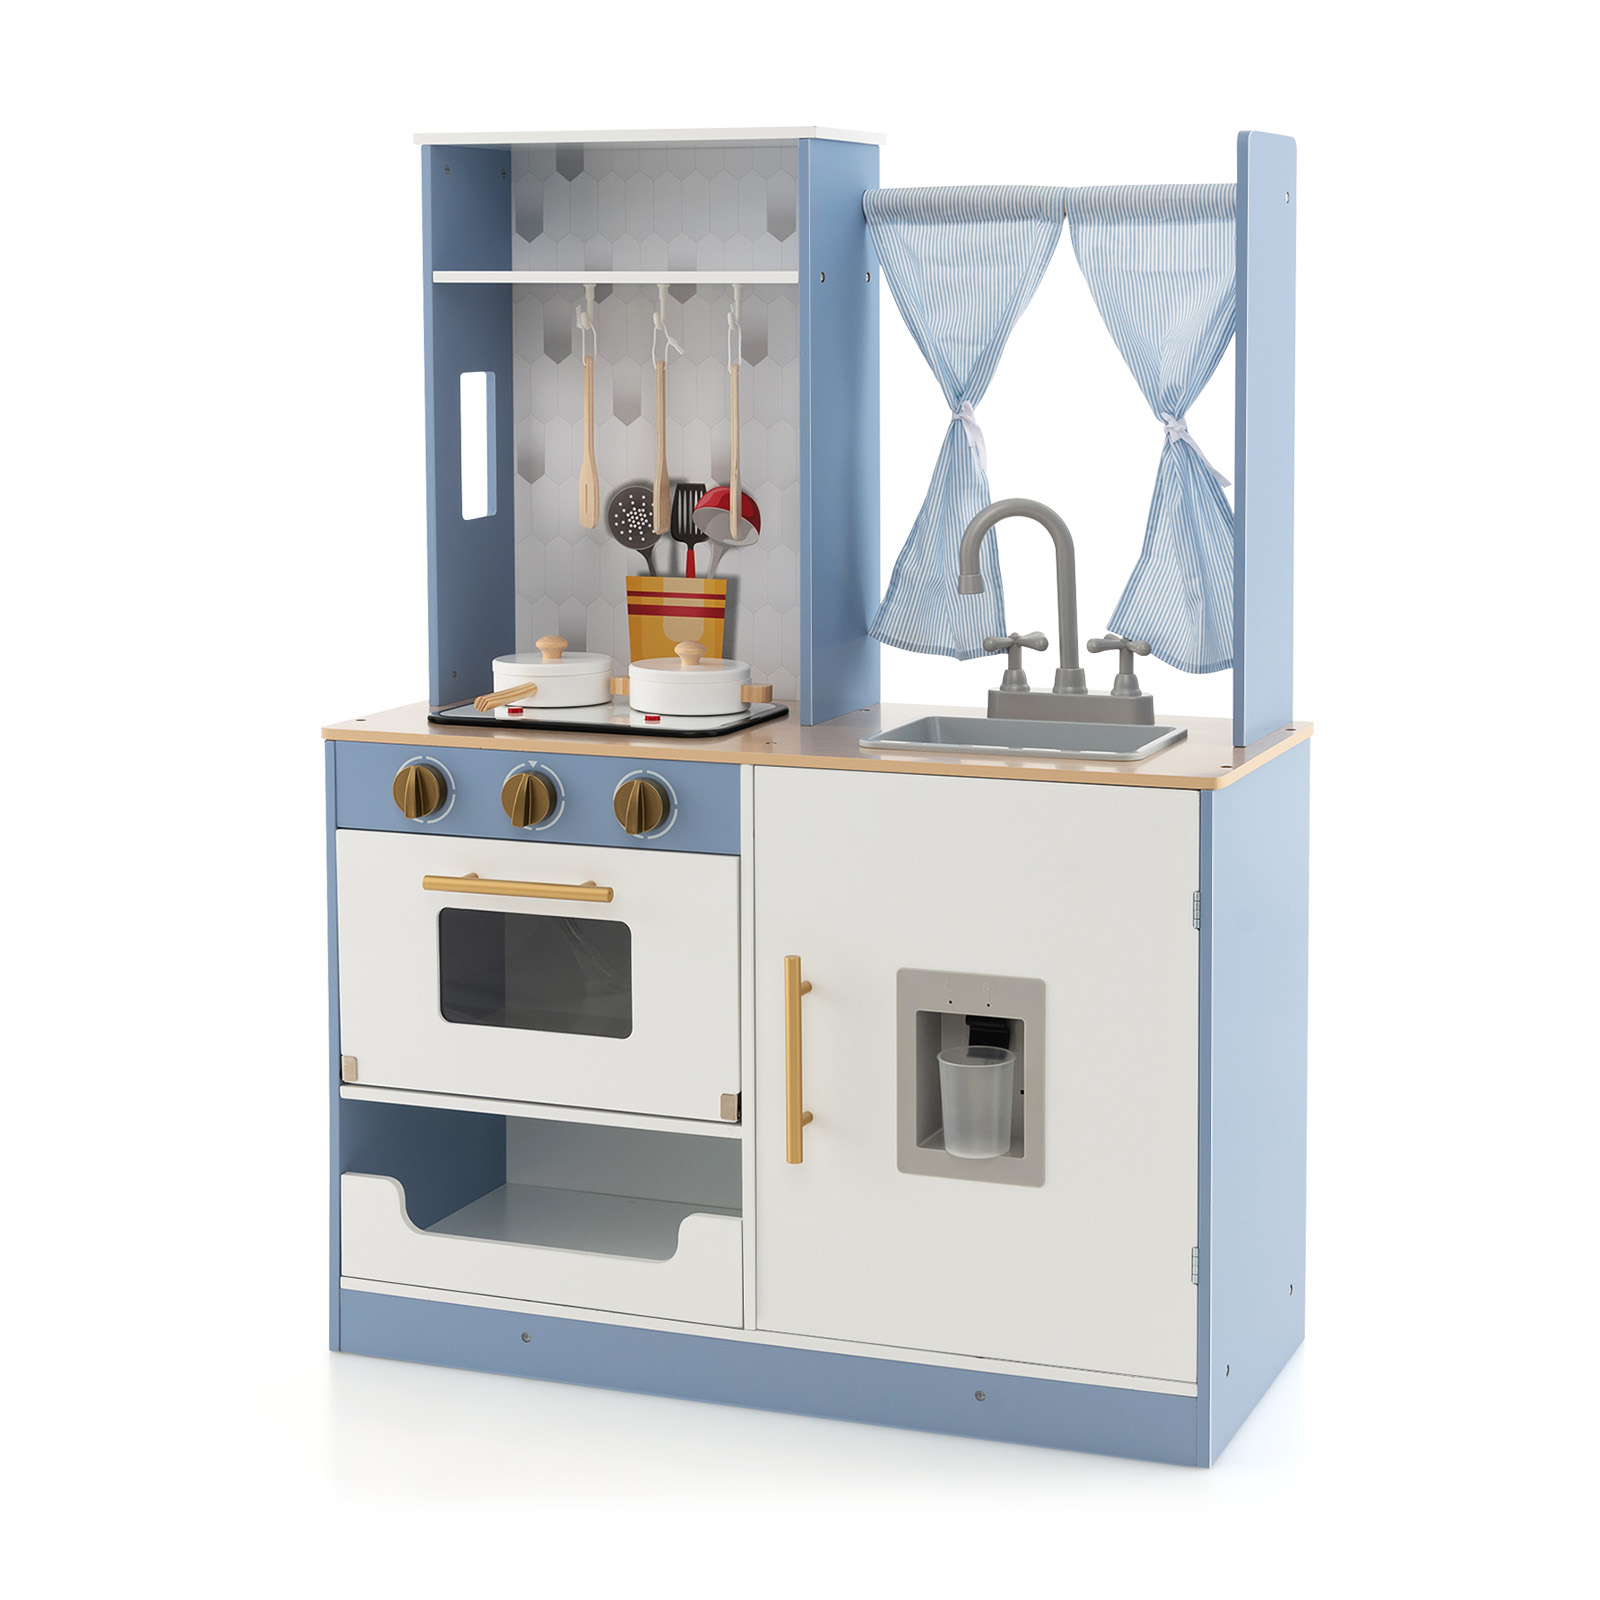 Wooden Kitchen Playset with Cookware and Storage for Kids-Blue